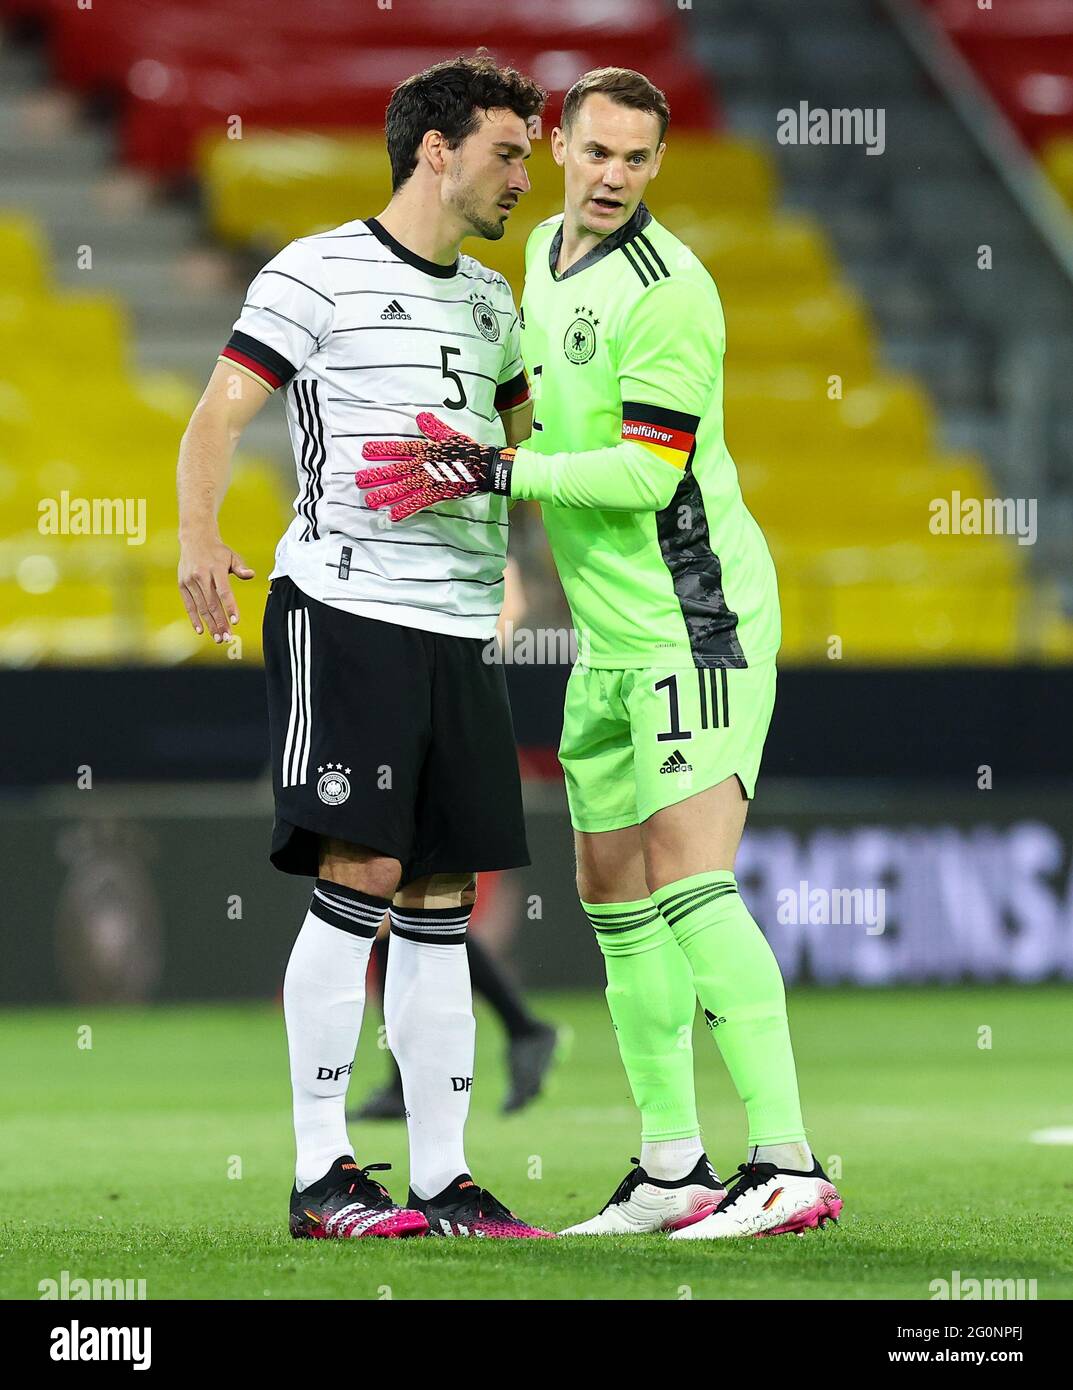 Innsbruck, Austria. 02nd June, 2021. Football: Internationals, Germany -  Denmark at Tivoli Stadium. Mats Hummels (l) and goalkeeper Manuel Neuer of  Germany stand together before the match. Credit: Christian  Charisius/dpa/Alamy Live News